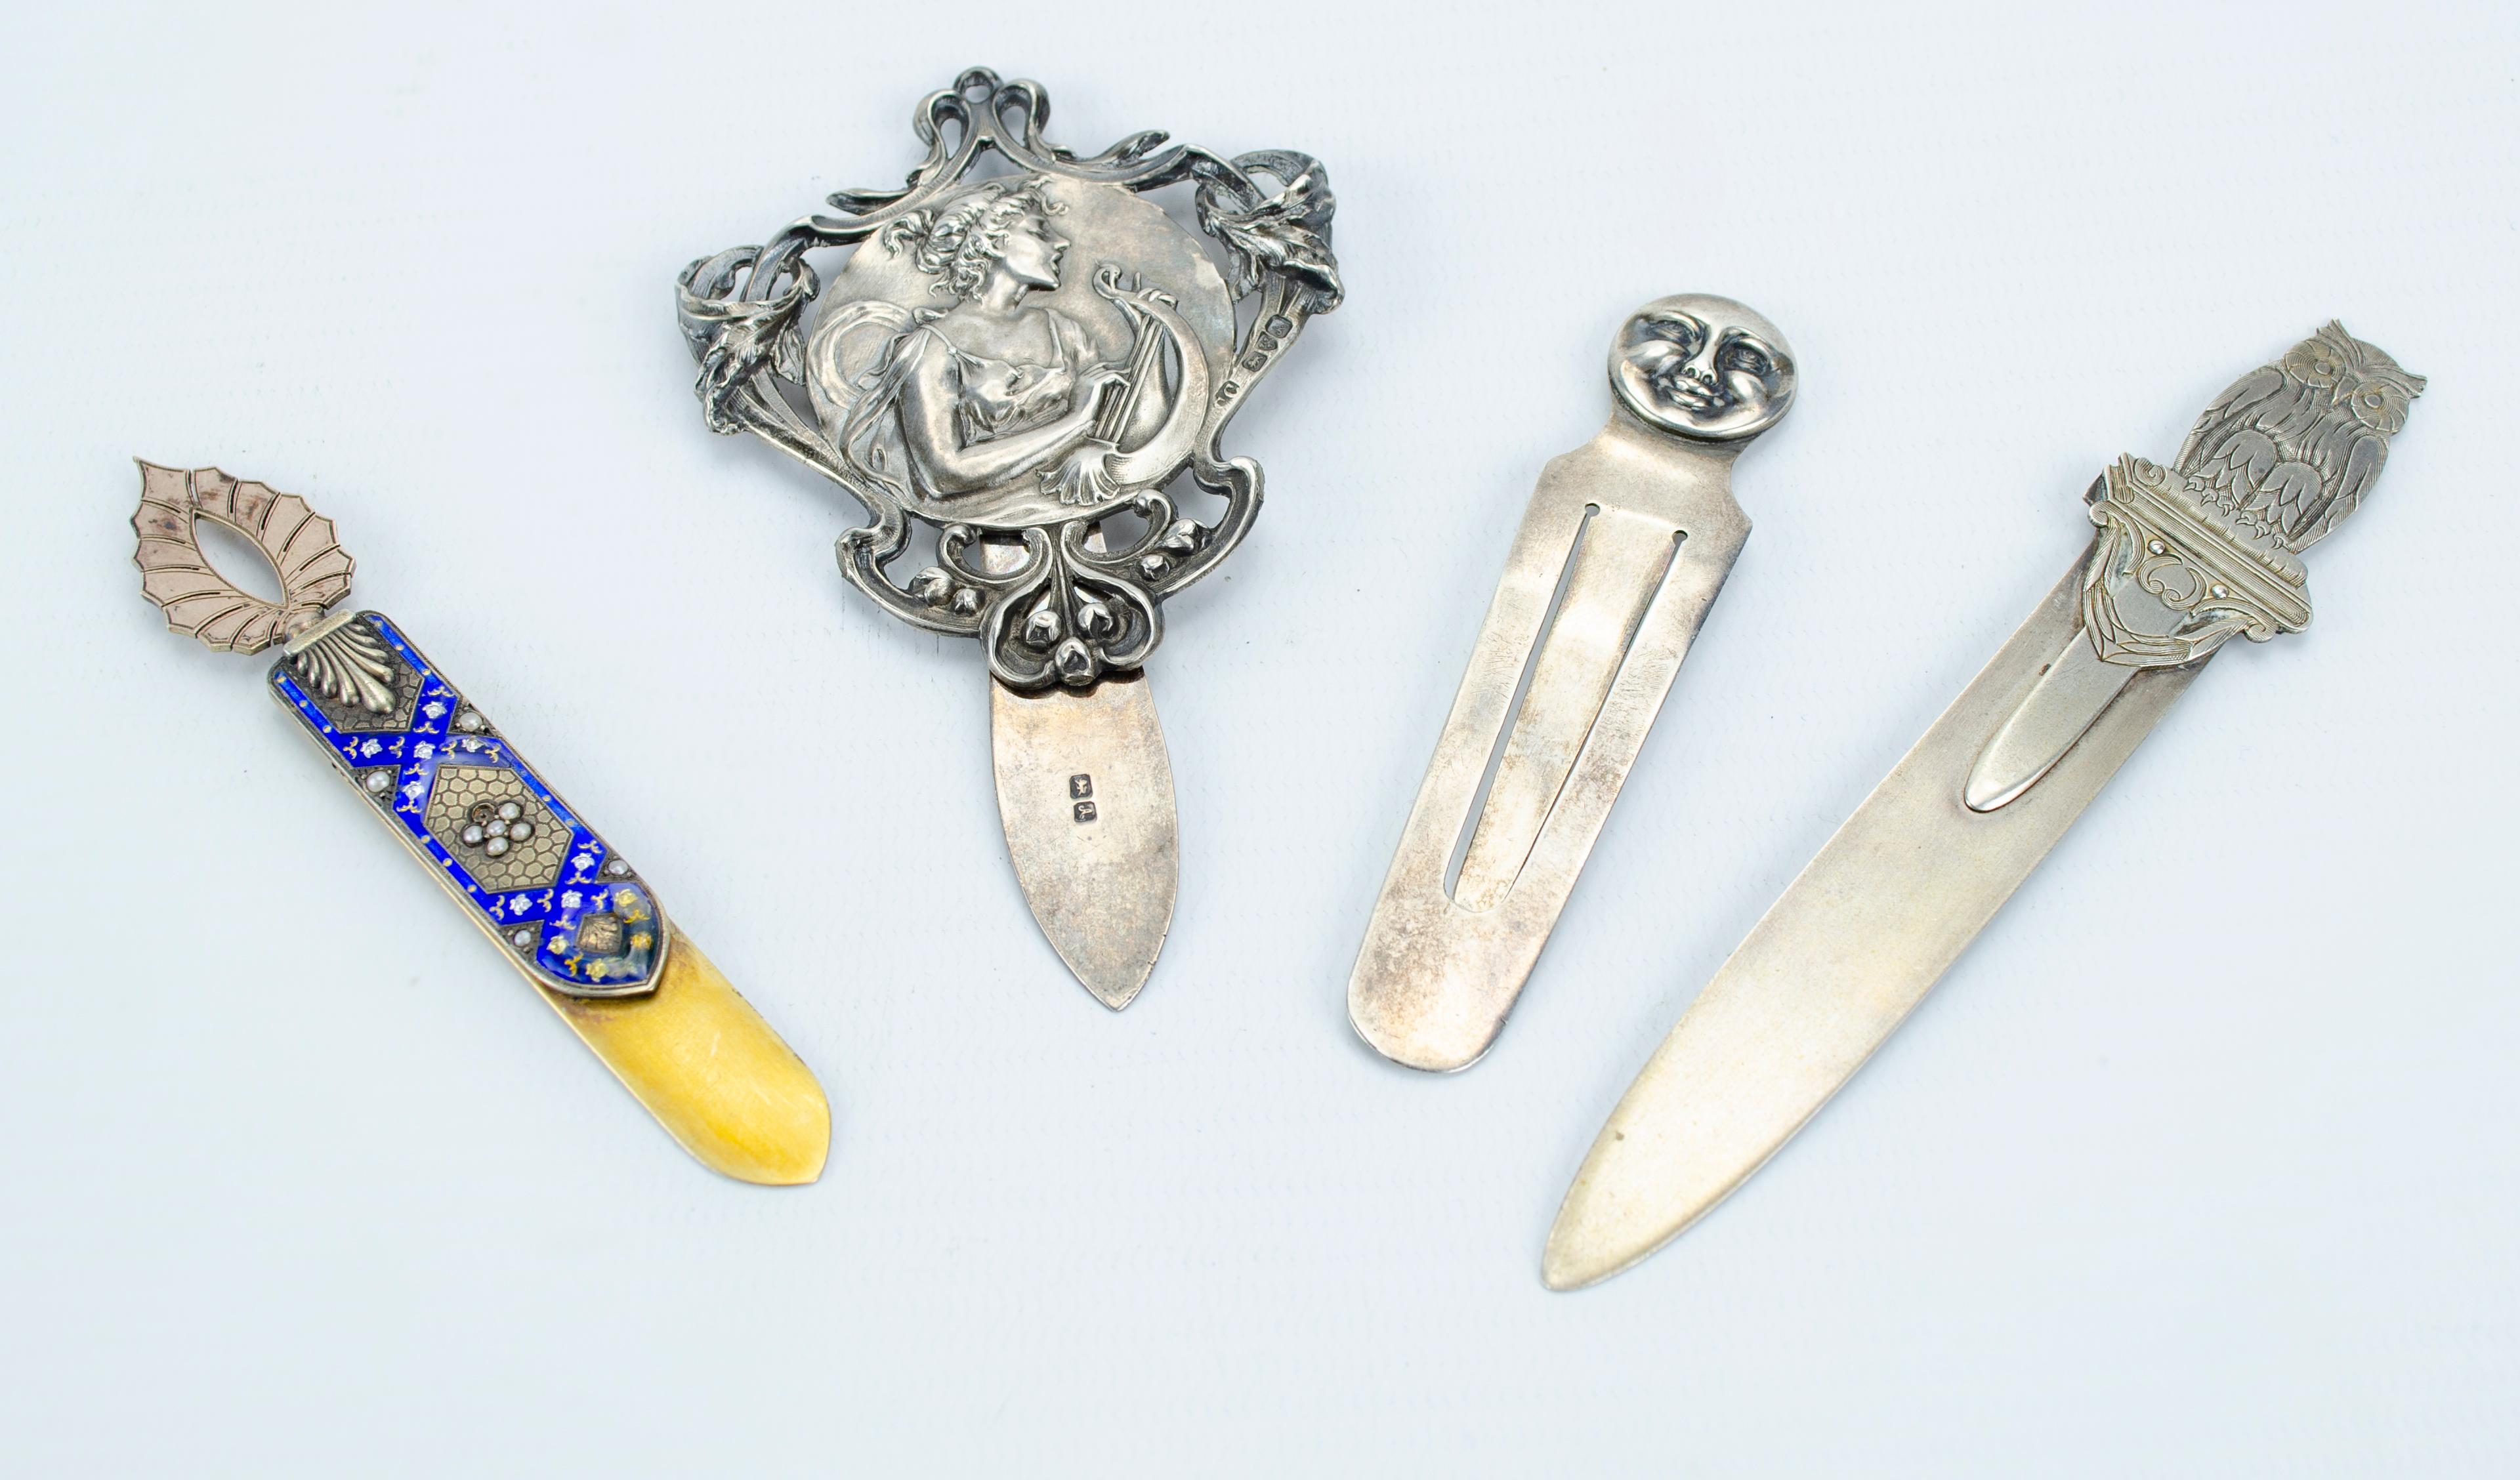 Collection of bookmarks
1- This is the largest size
 Art Nouveau material English silver
 size 10 cm x 6 cm perfect condition
2- Vermeil silver with enamel and natural pearls
 (missing a small pearl)
 10 cm x 2 cm without markings
3- Man of